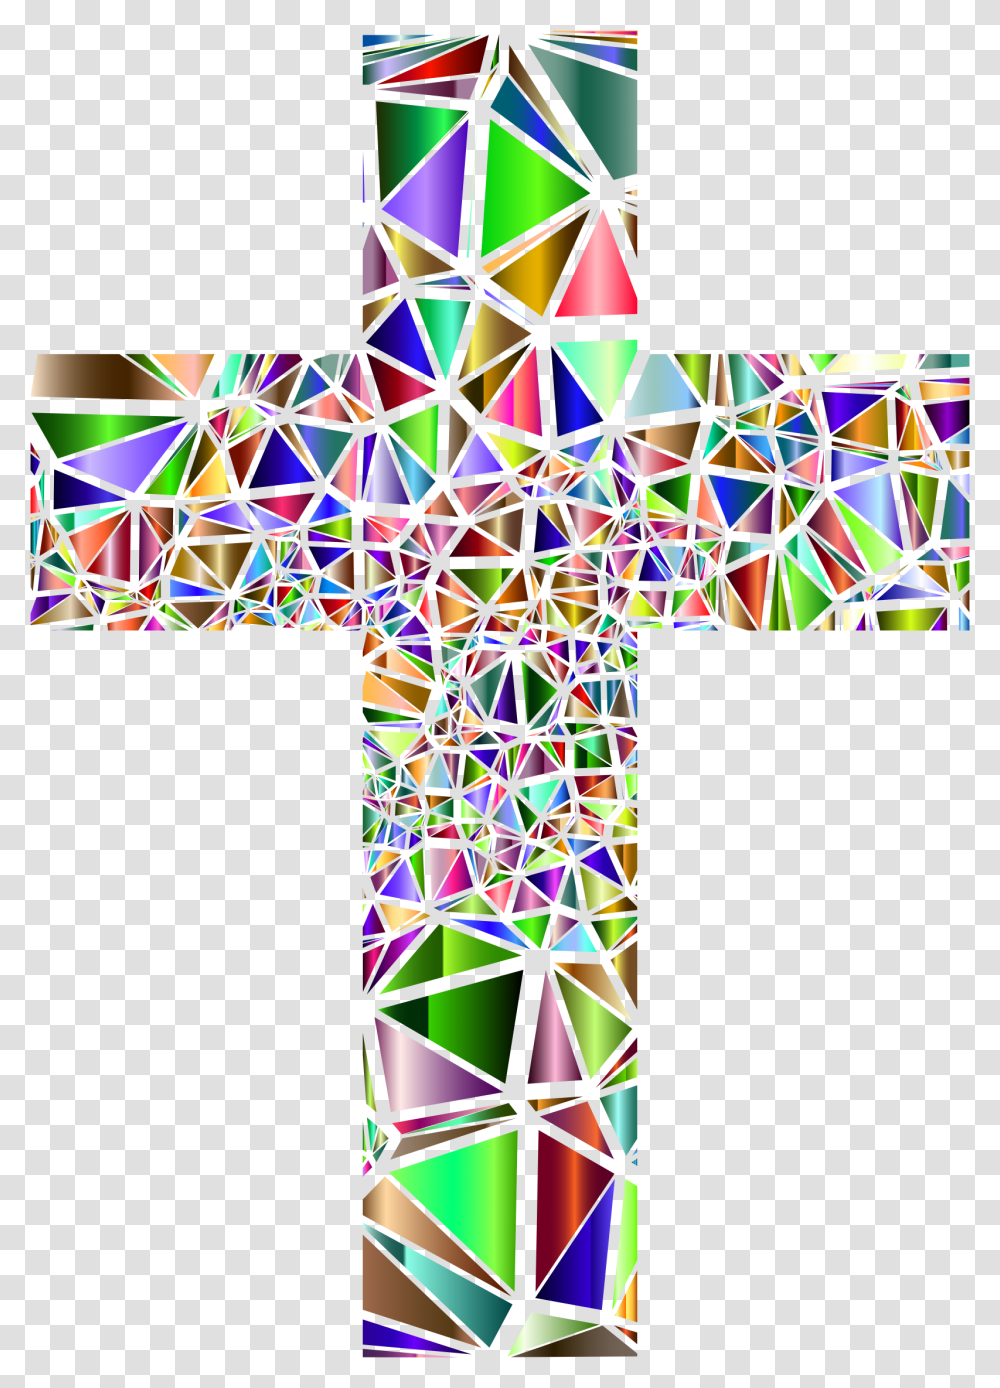 Low Poly Stained Glass Cross 5 No Background Freeuse Stained Glass Cross Clipart, Construction Crane Transparent Png